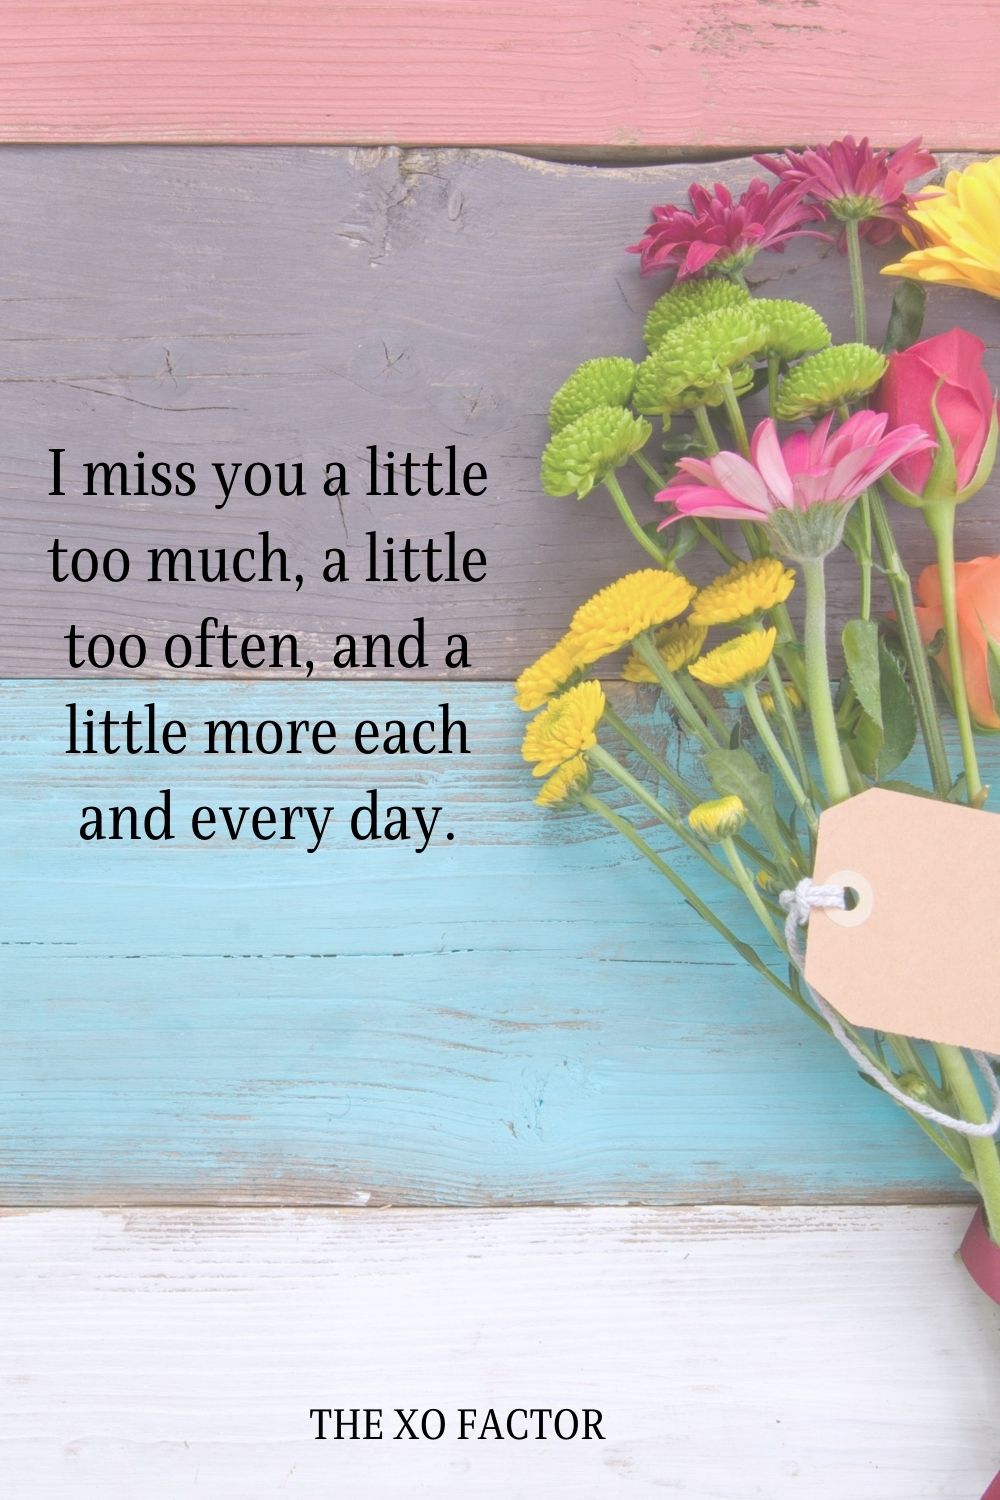 I miss you a little too much, a little too often, and a little more each and every day.